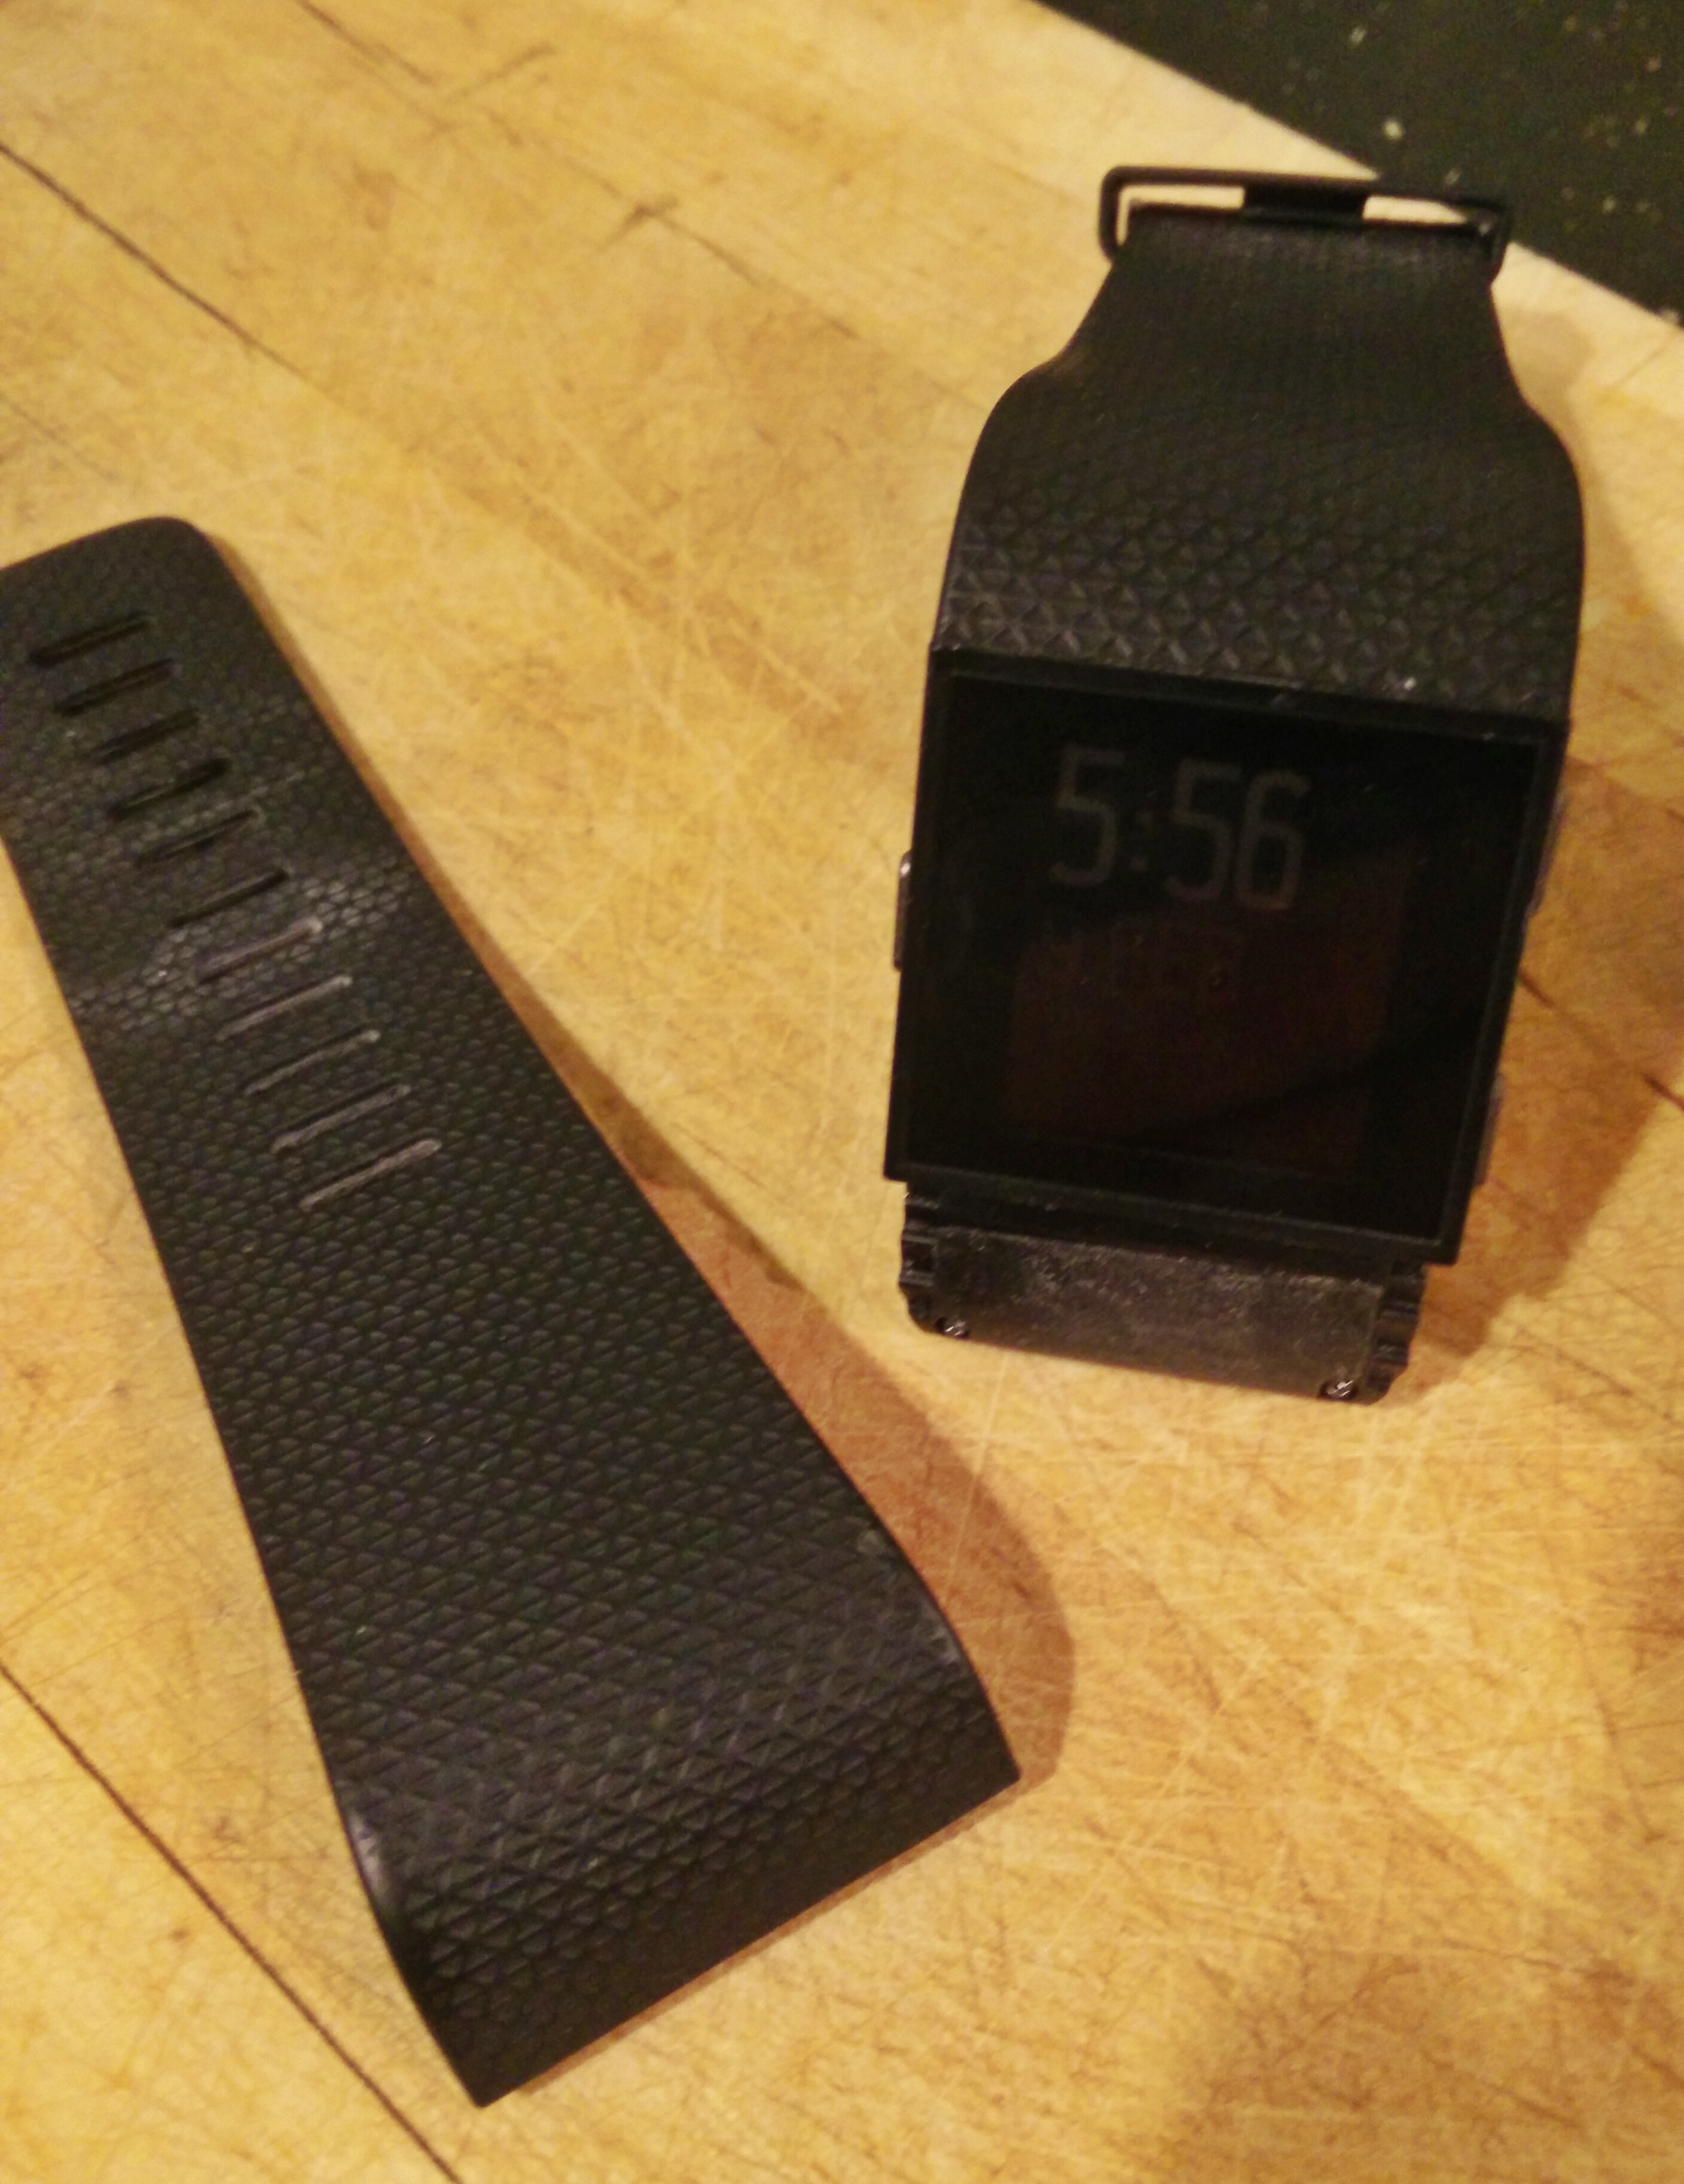 fitbit surge leather band